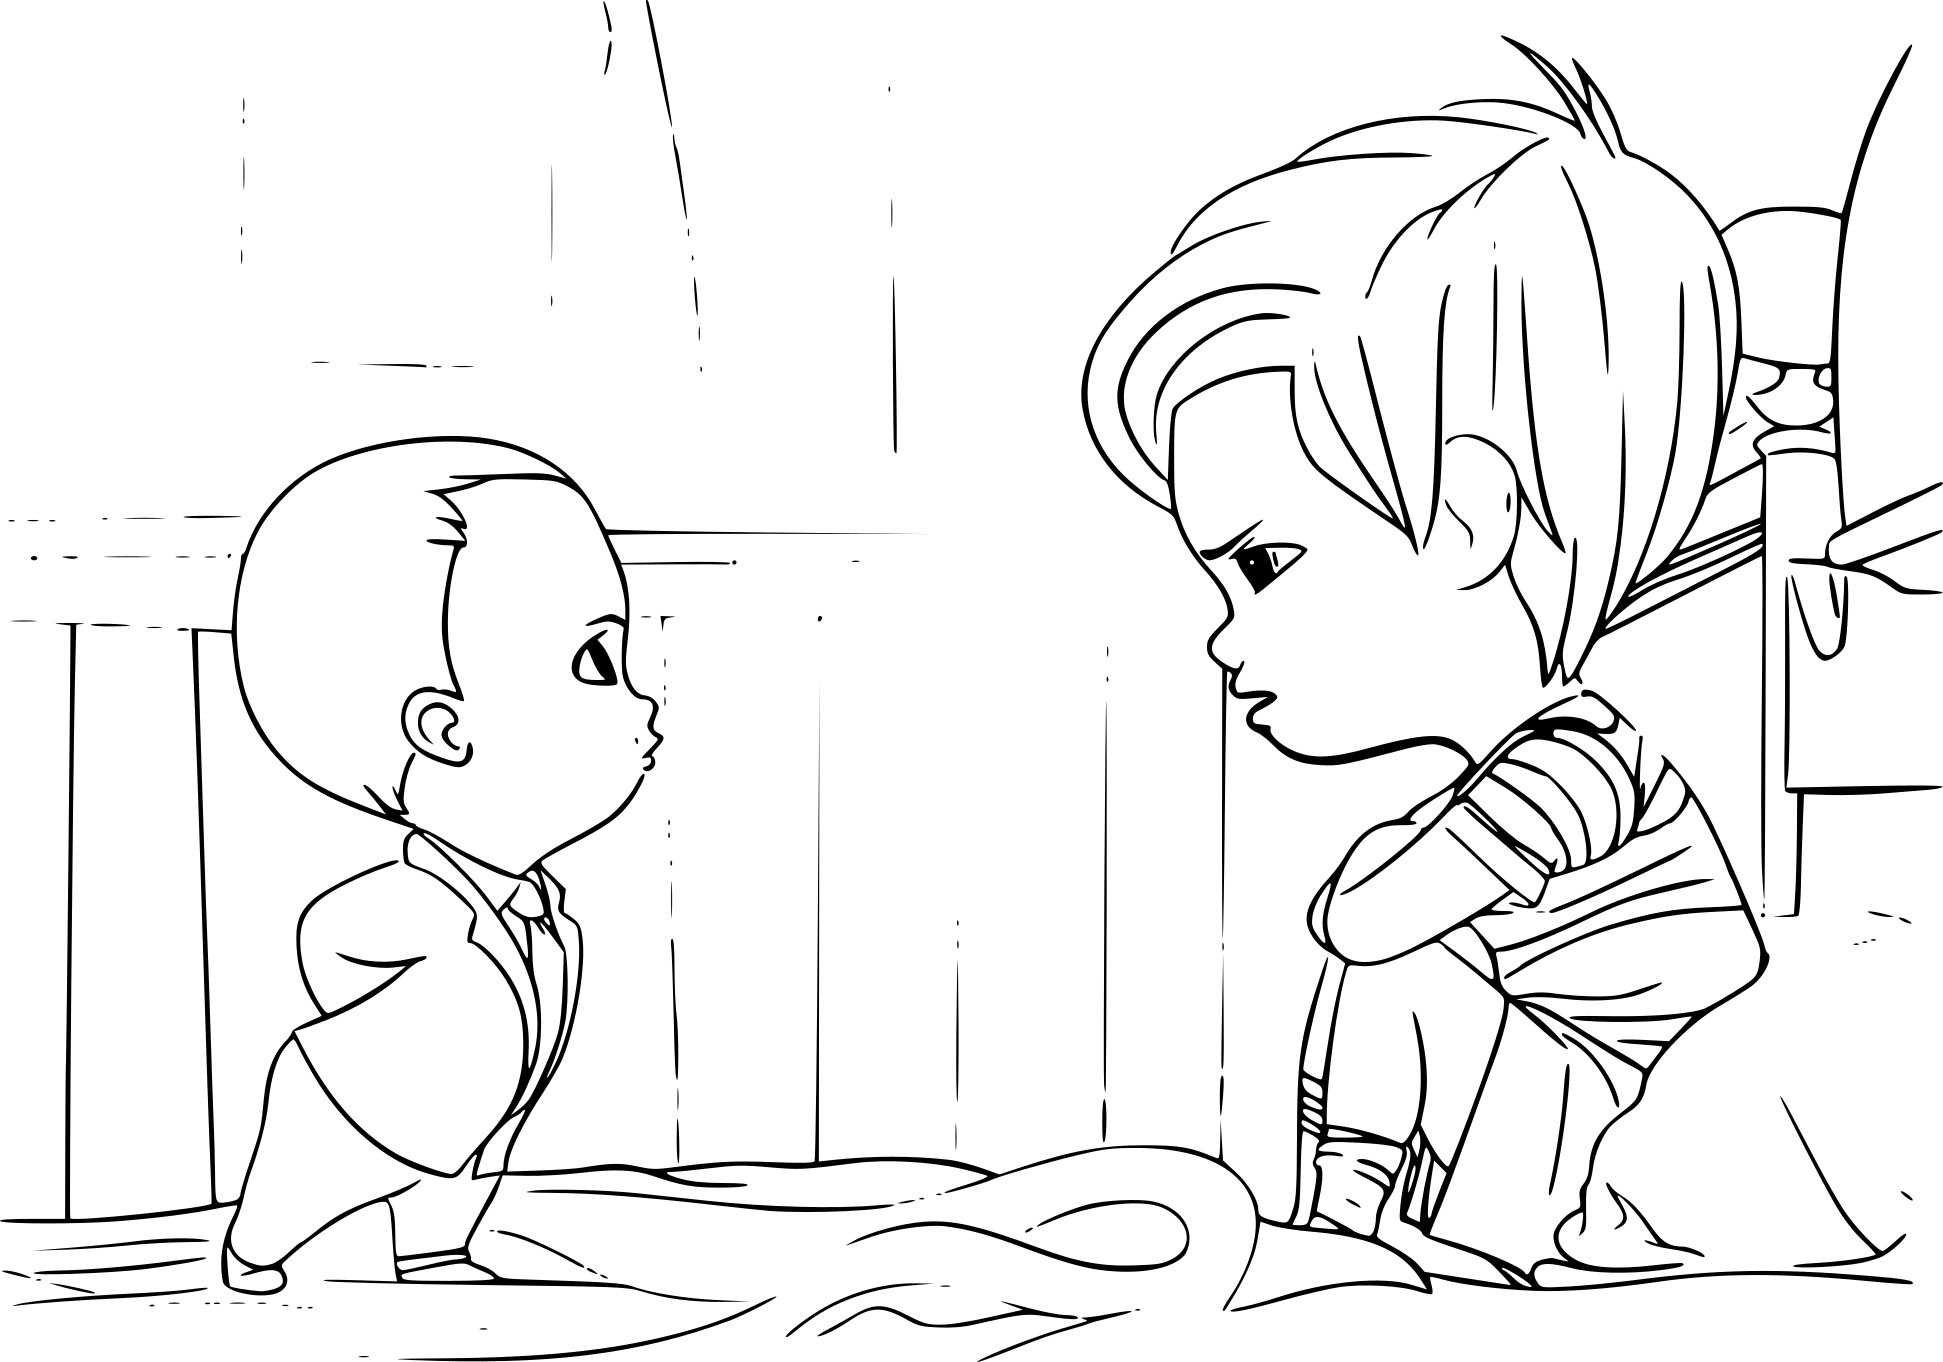 Boss Baby And Tim Talking Coloring Page - Free Printable Coloring Pages